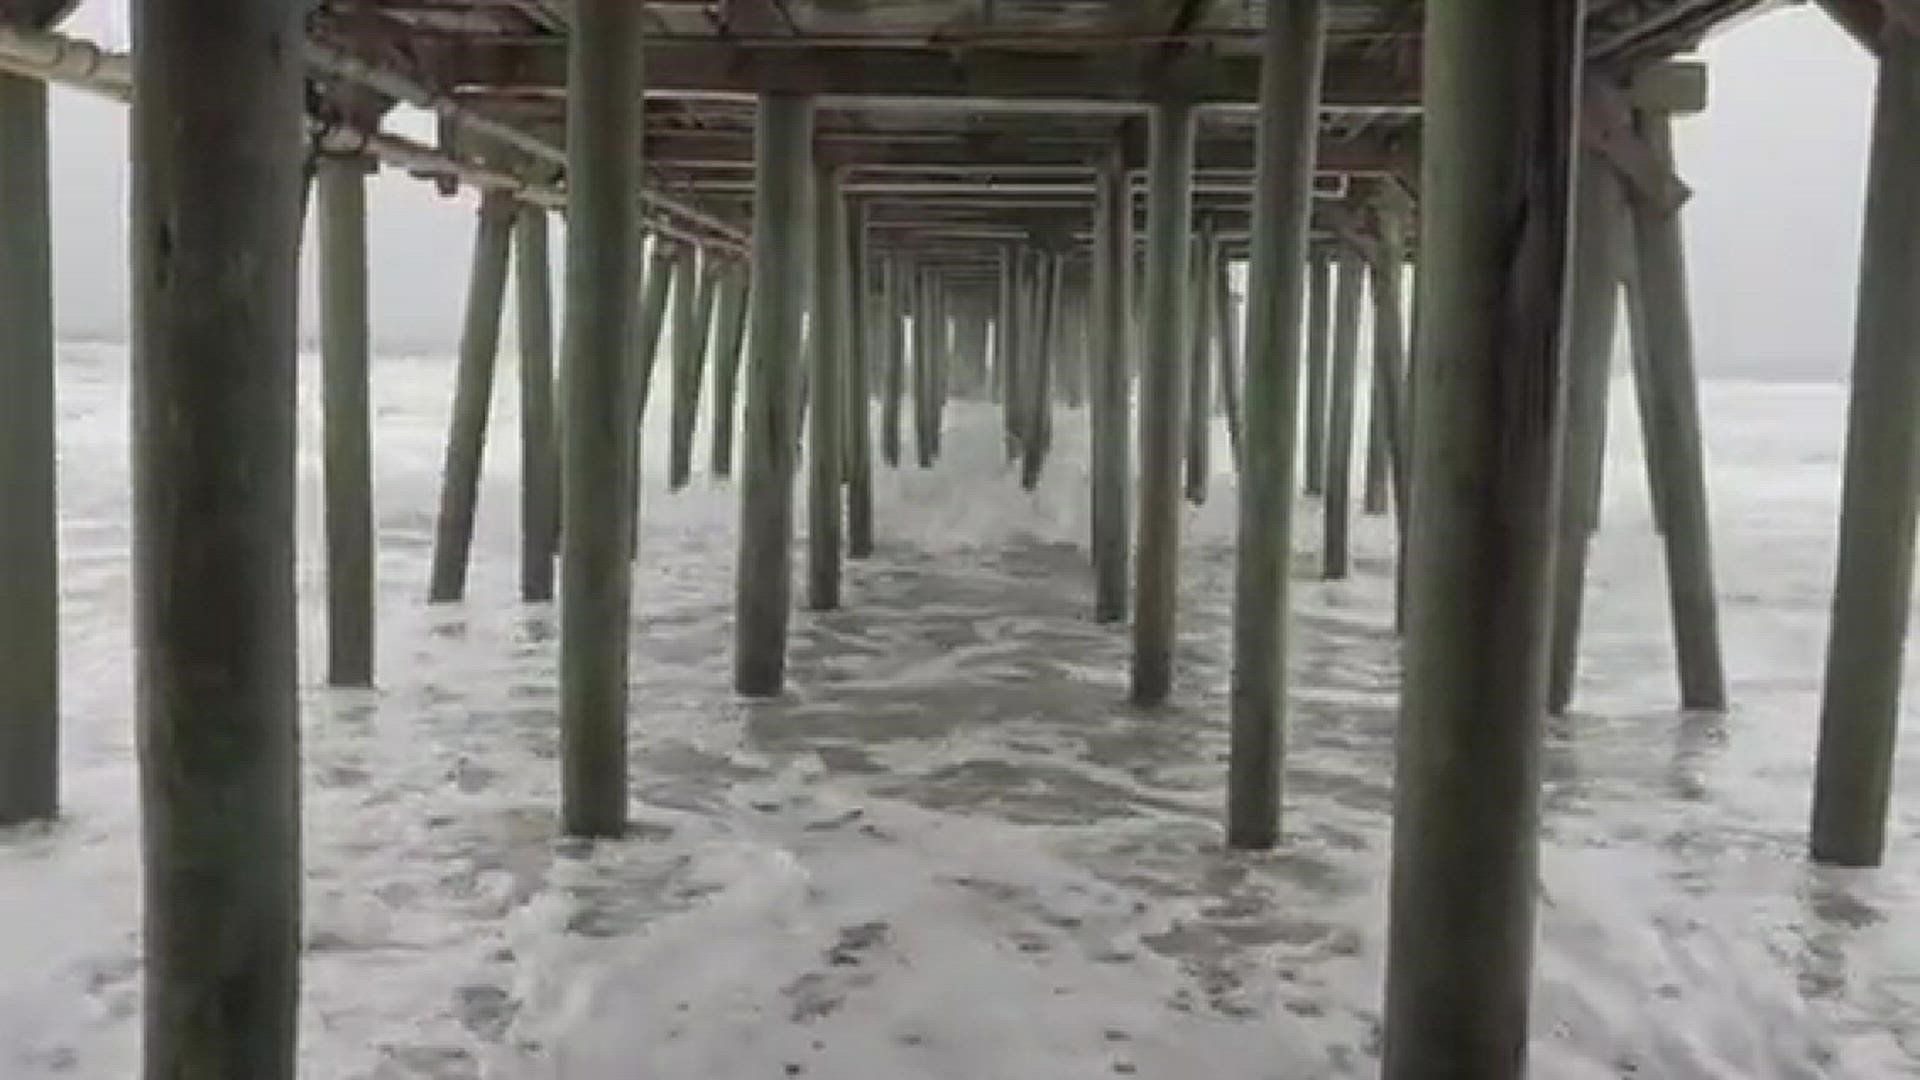 This was taken under the pier on OOB after that large storm
Credit: Margaret Jones